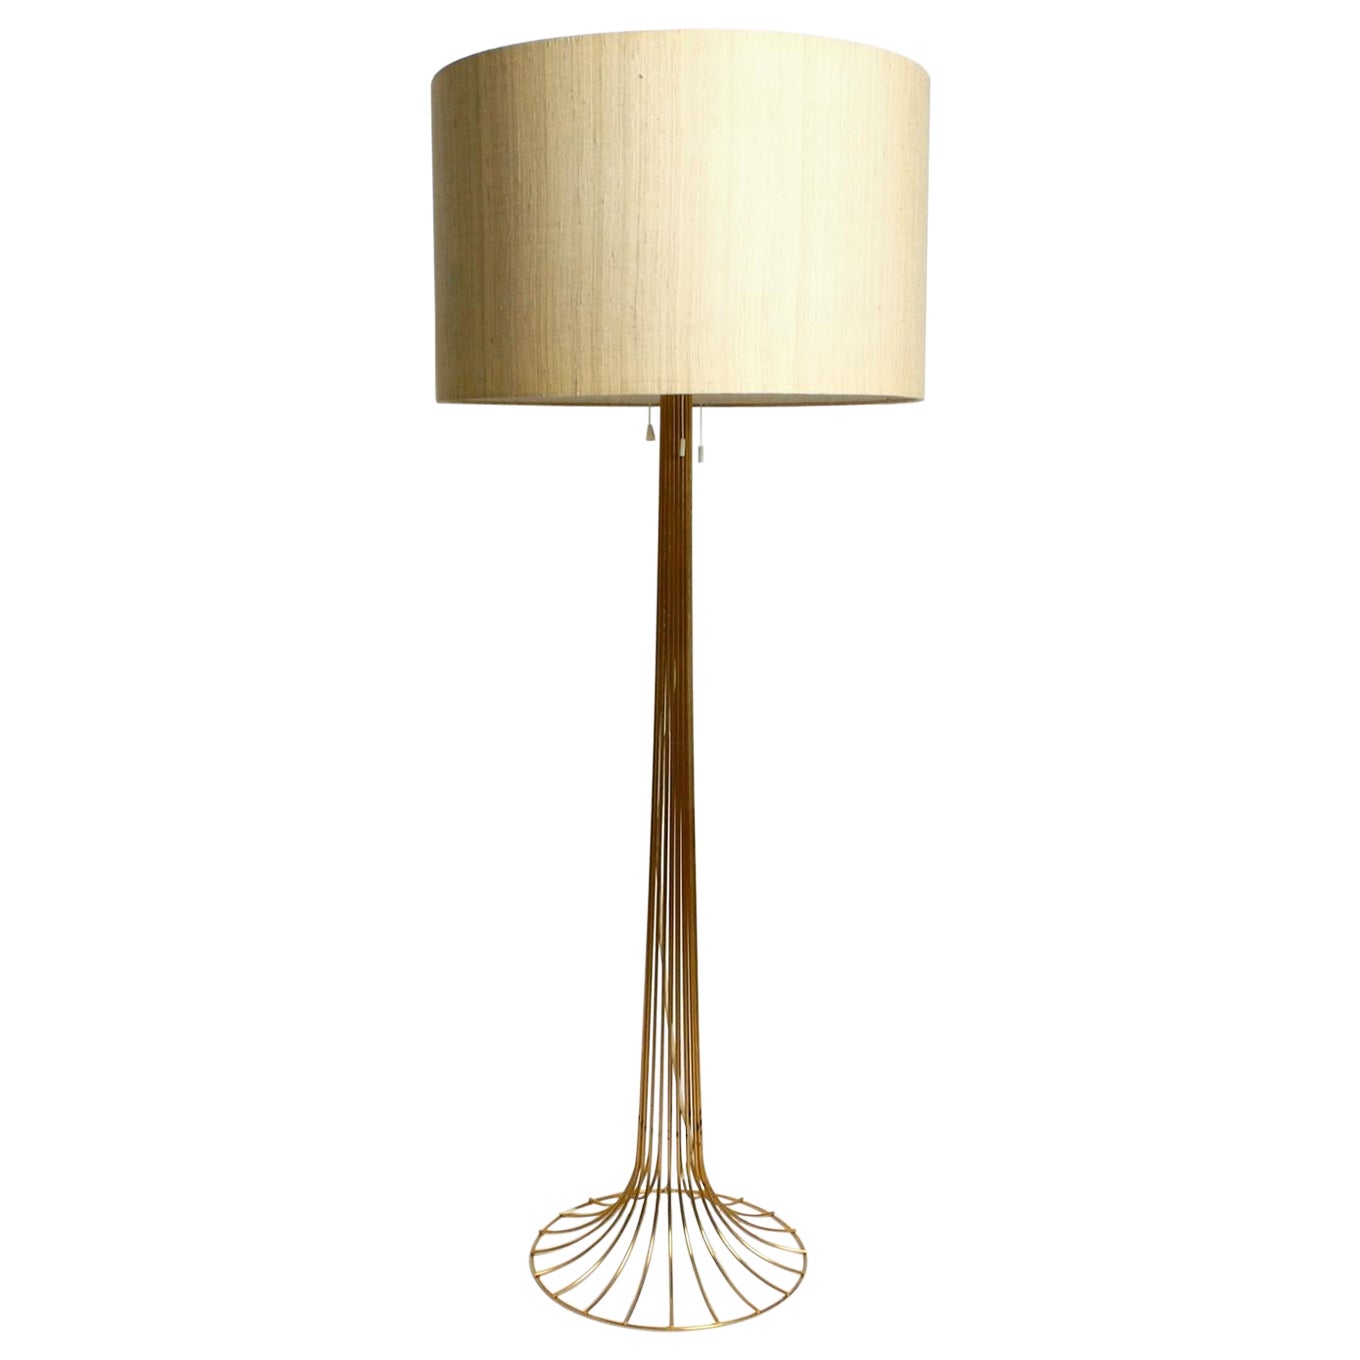 Original 1960s large metal wire floor lamp with wild silk shade anodized in gold For Sale